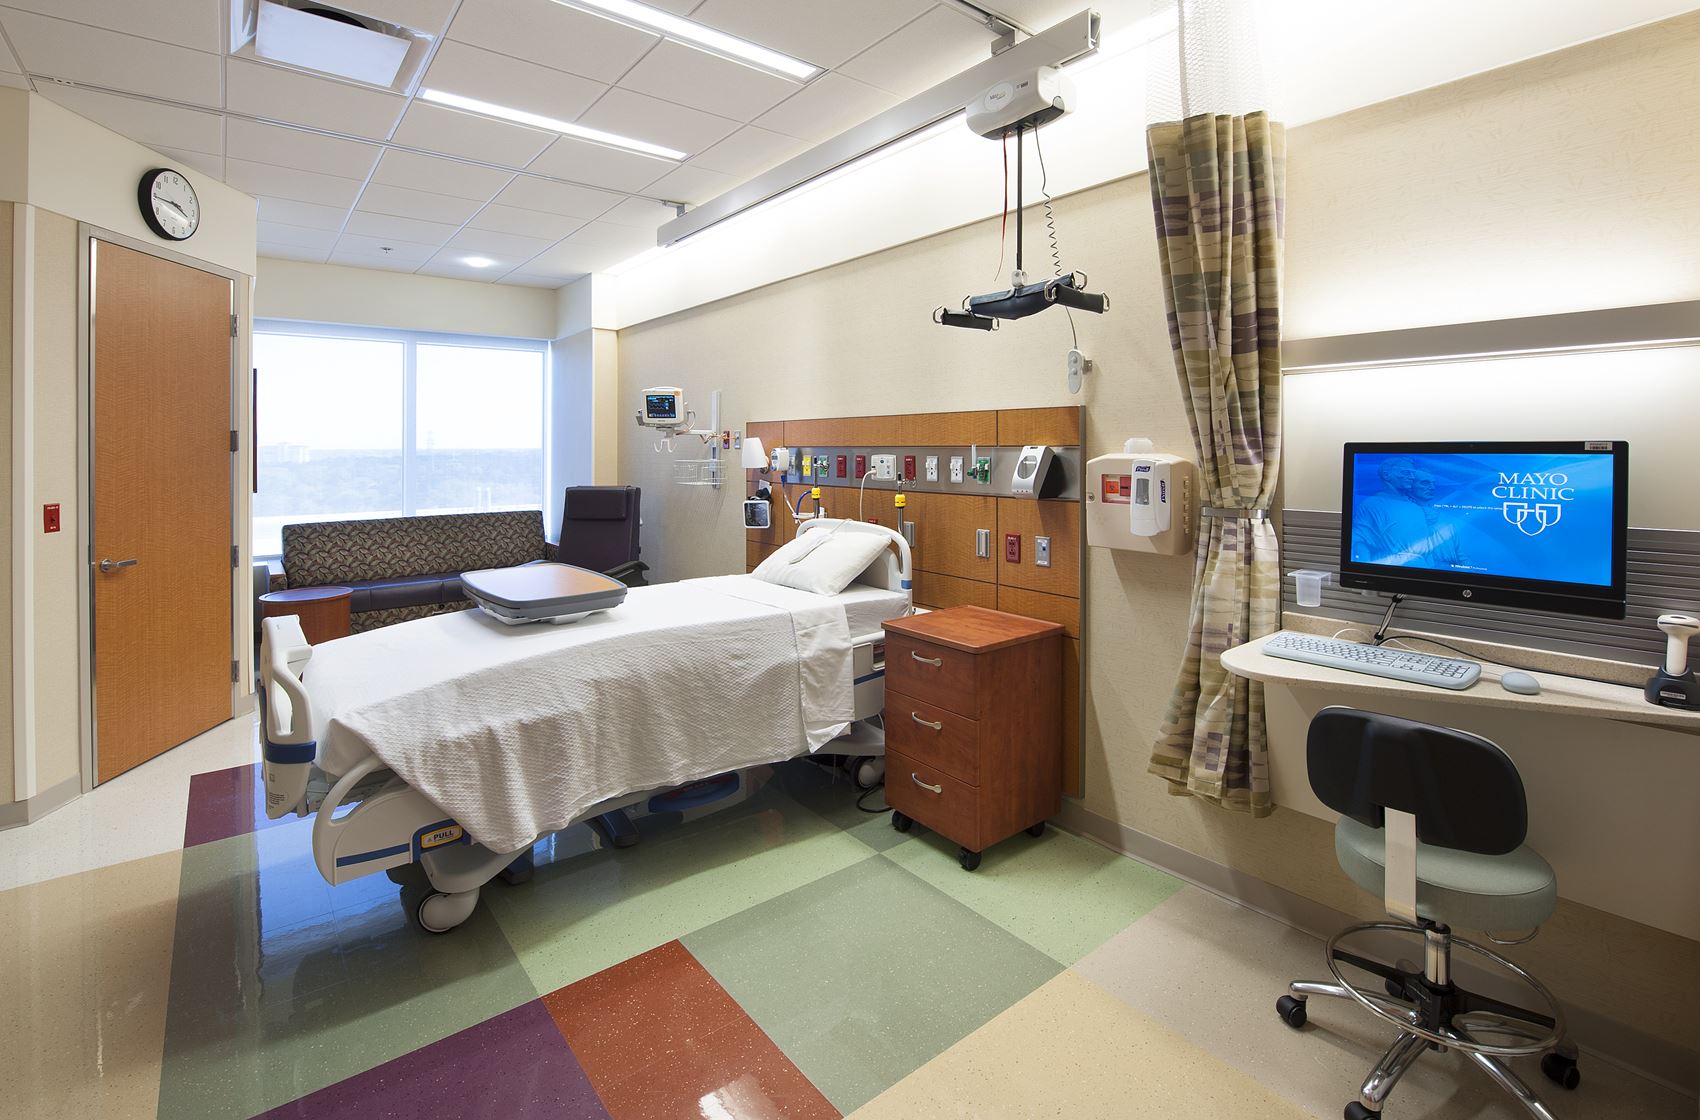 Patient room at Mayo Clinic in Jacksonville